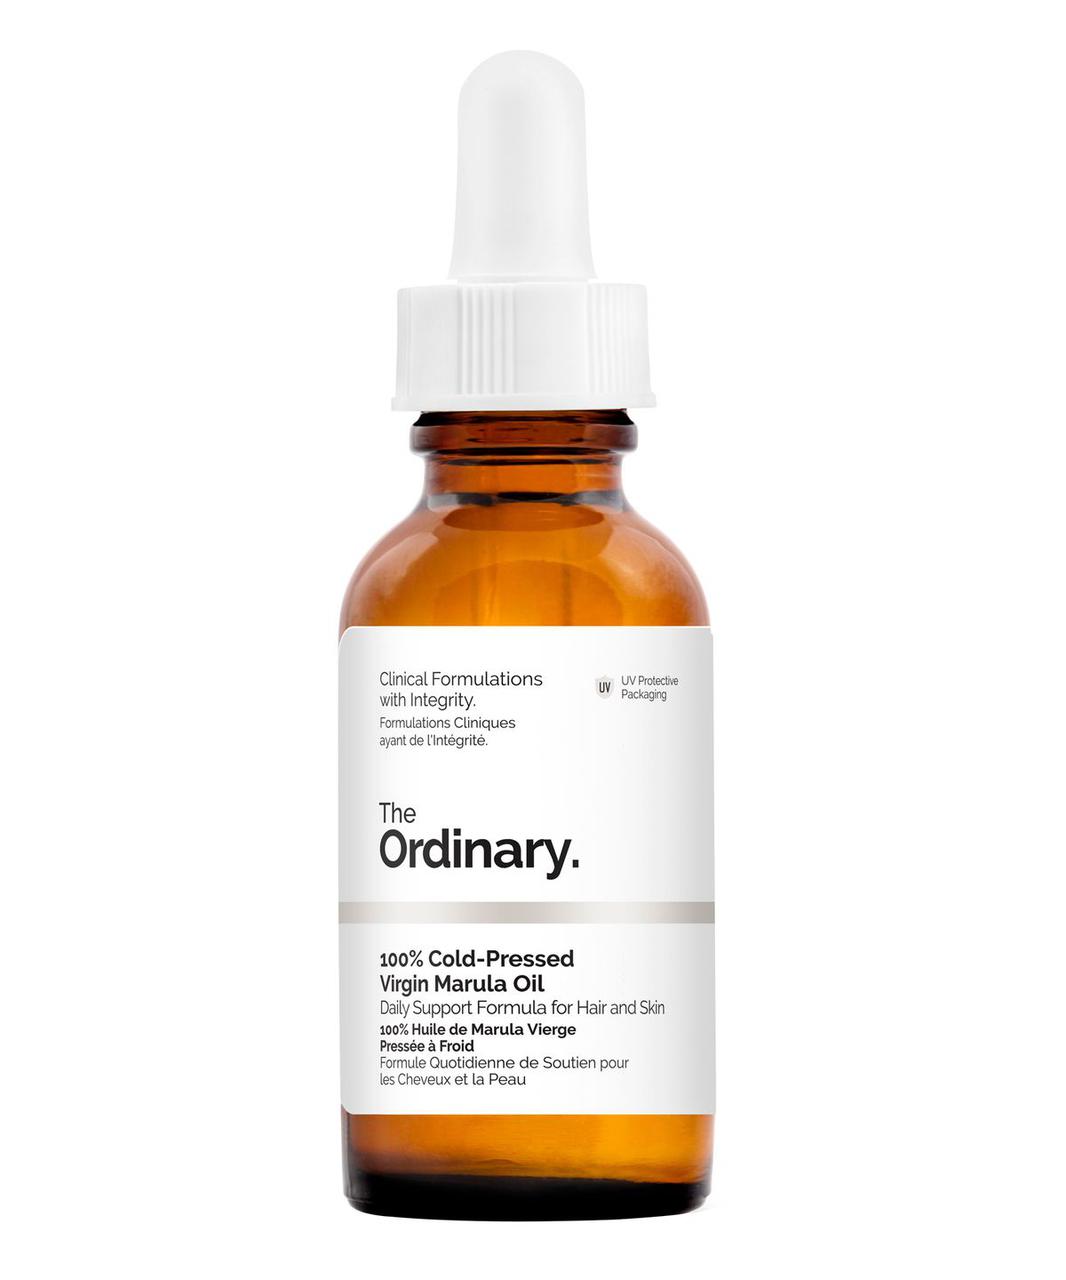 The Ordinary - 100% Cold-Pressed Virgin Marula Oil Масло Марулы